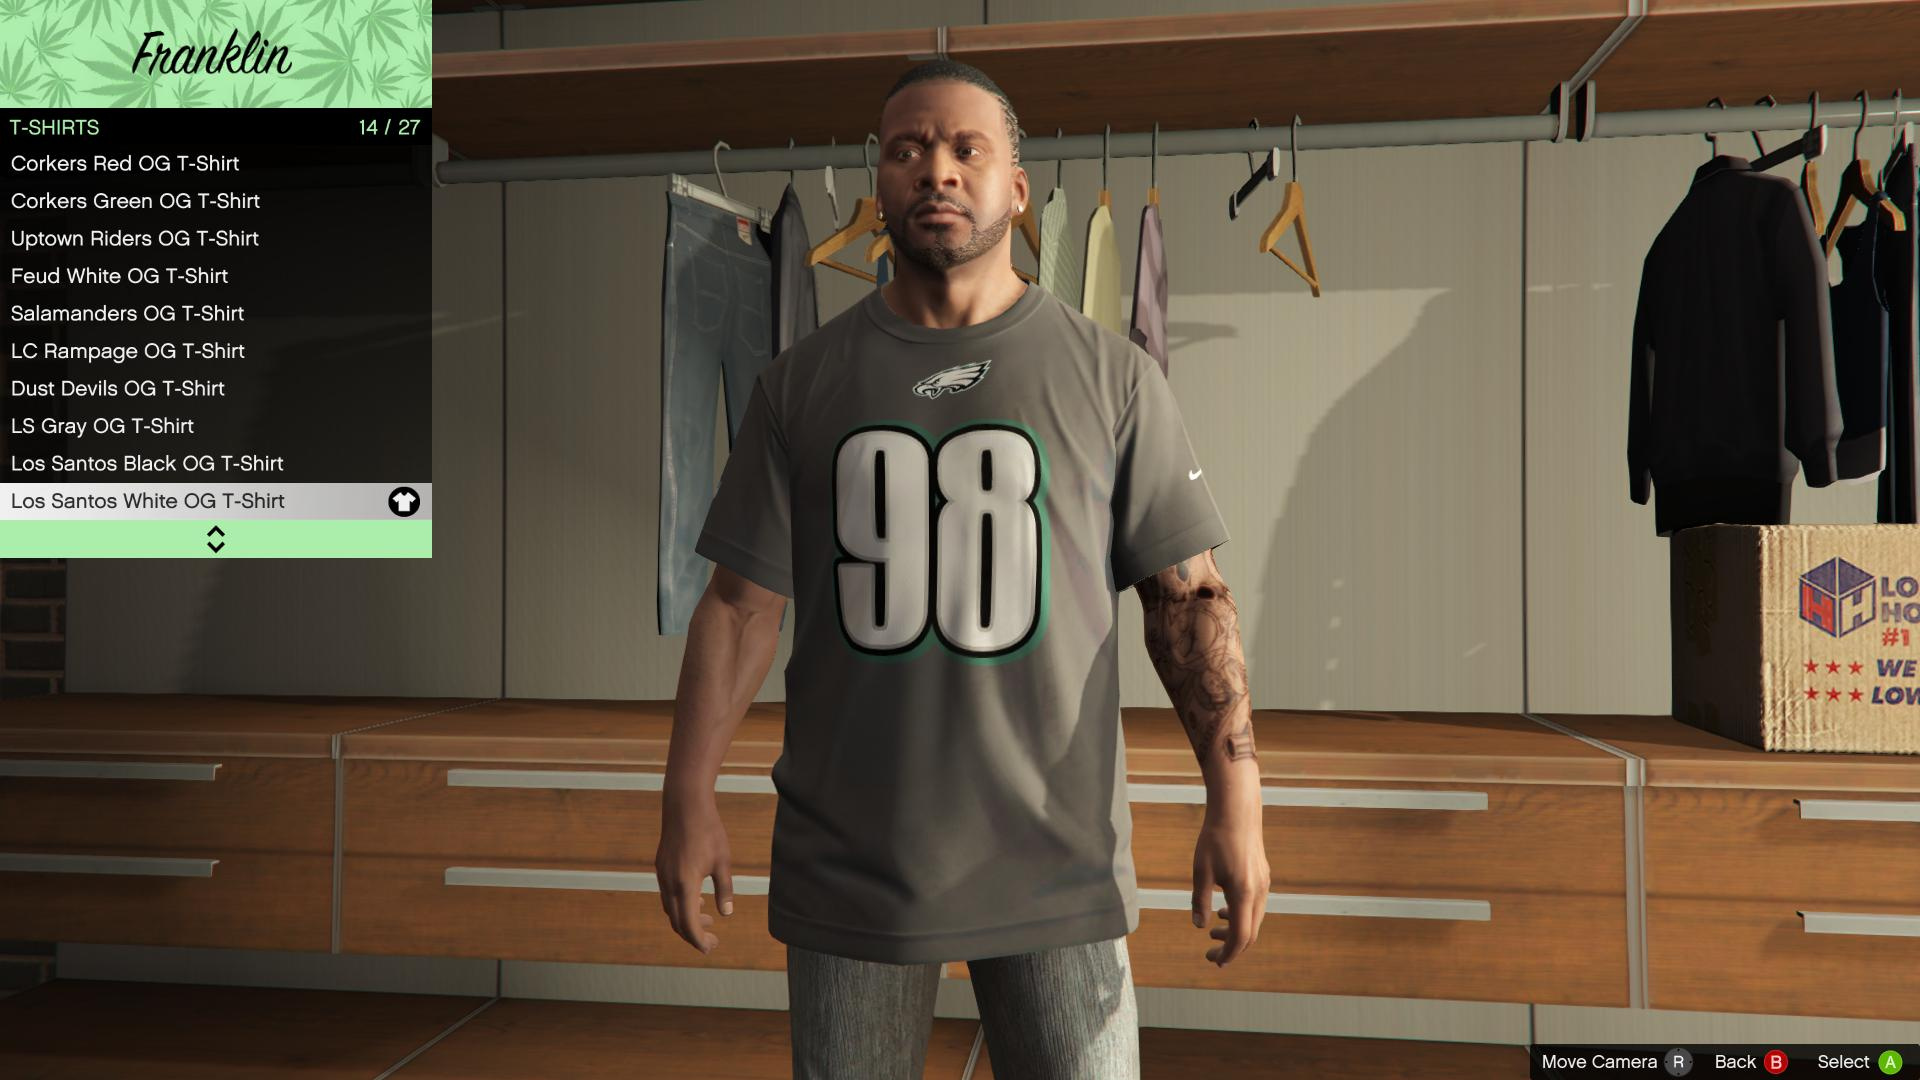 eagles jersey 15